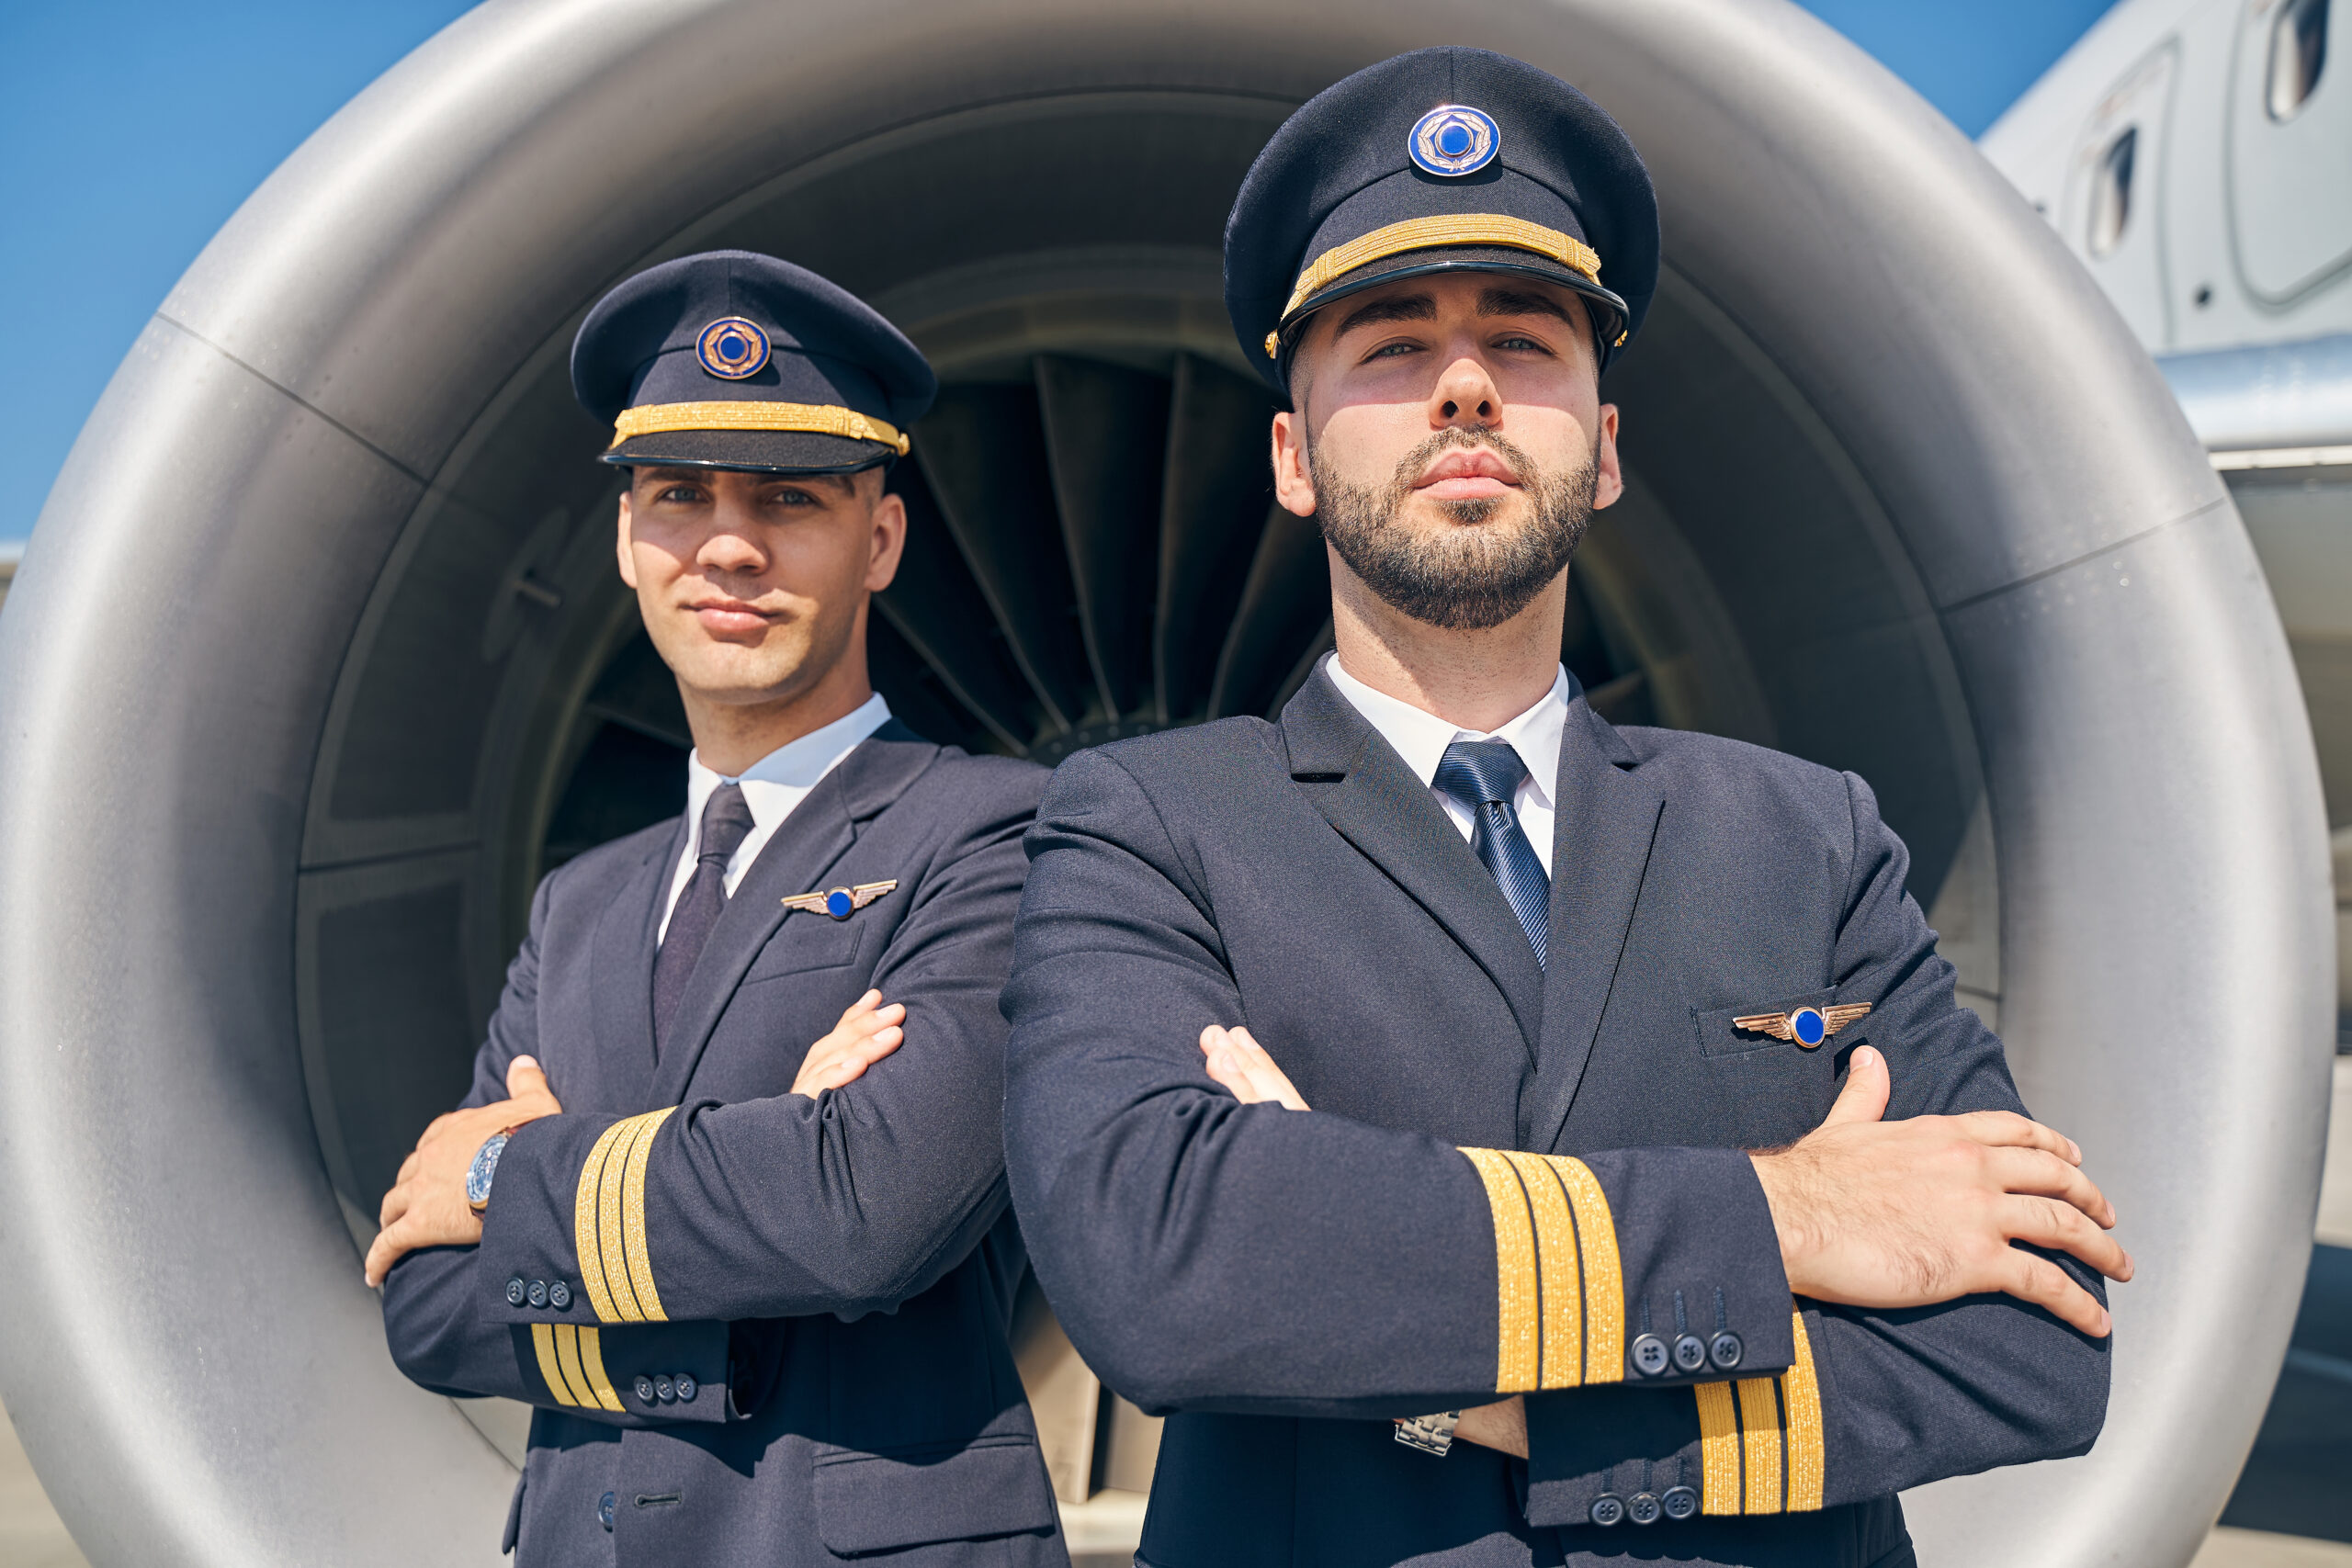 Waist-up portrait of calm young men in uniforms standing in front of the turbofan engine